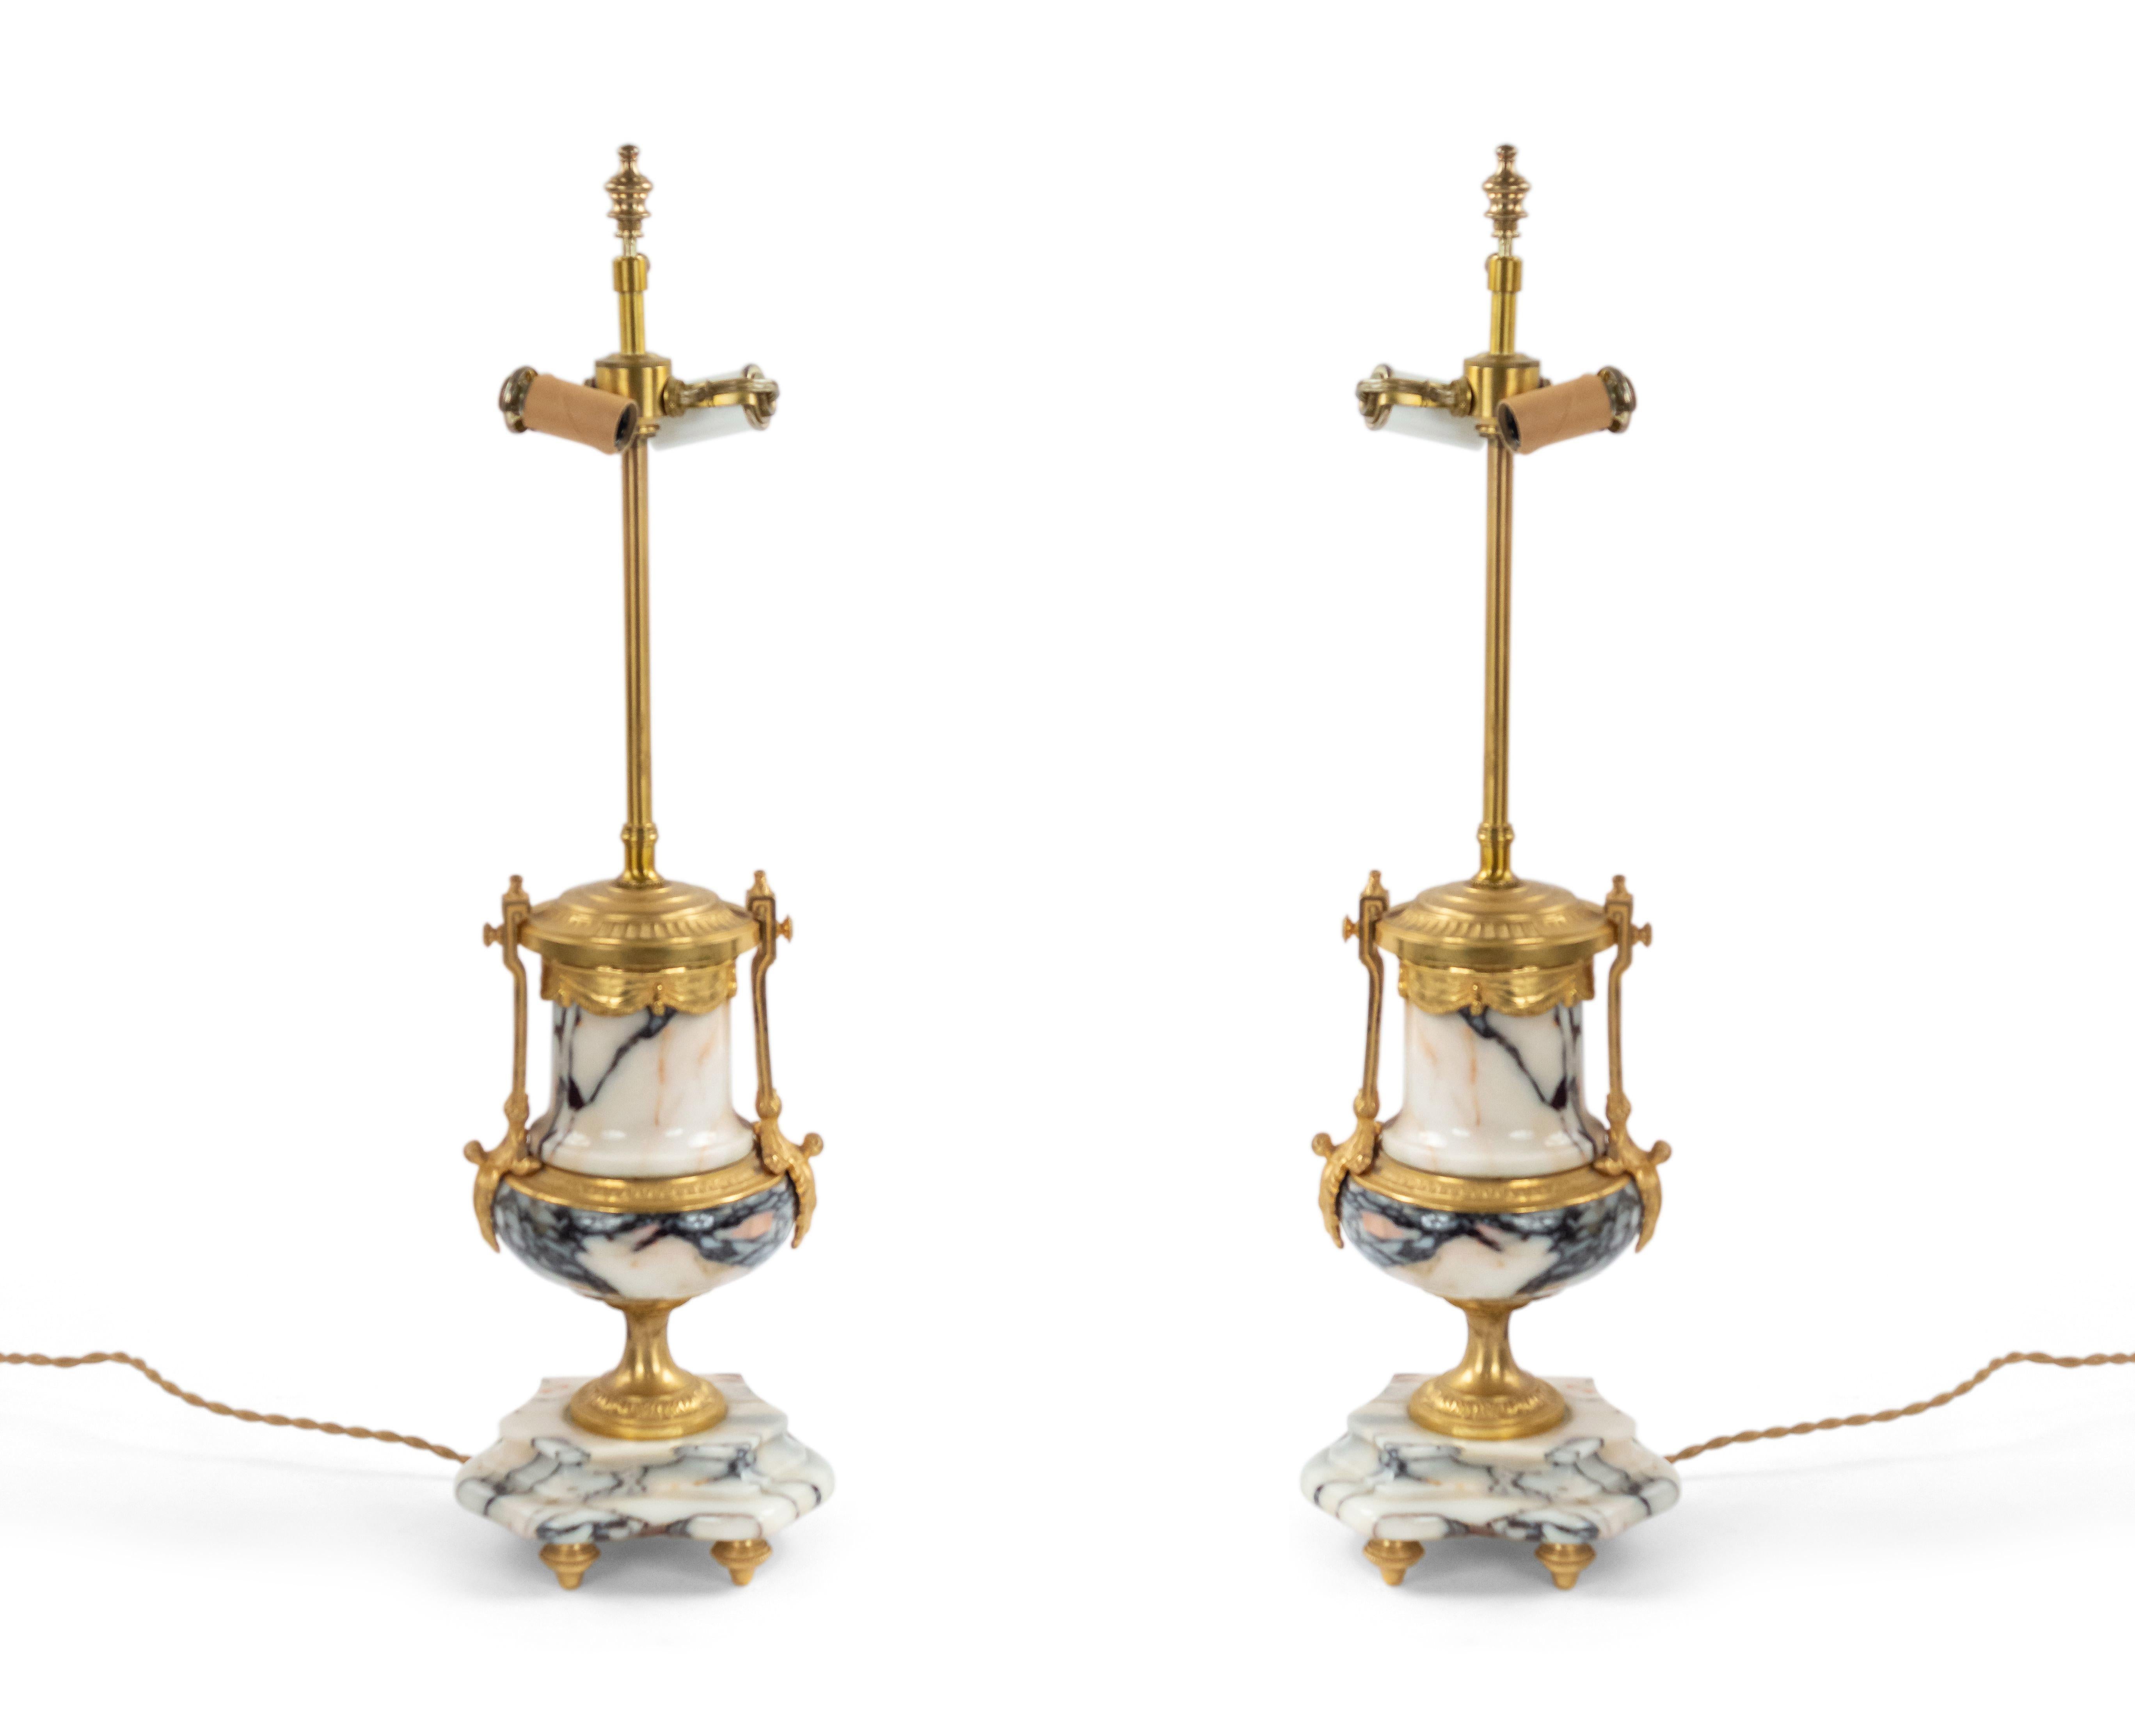 Pair of French Victorian (19/20th Century) white and black veined marble urn form lamps with gilt bronze side handles and trim (PRICED AS Pair).
